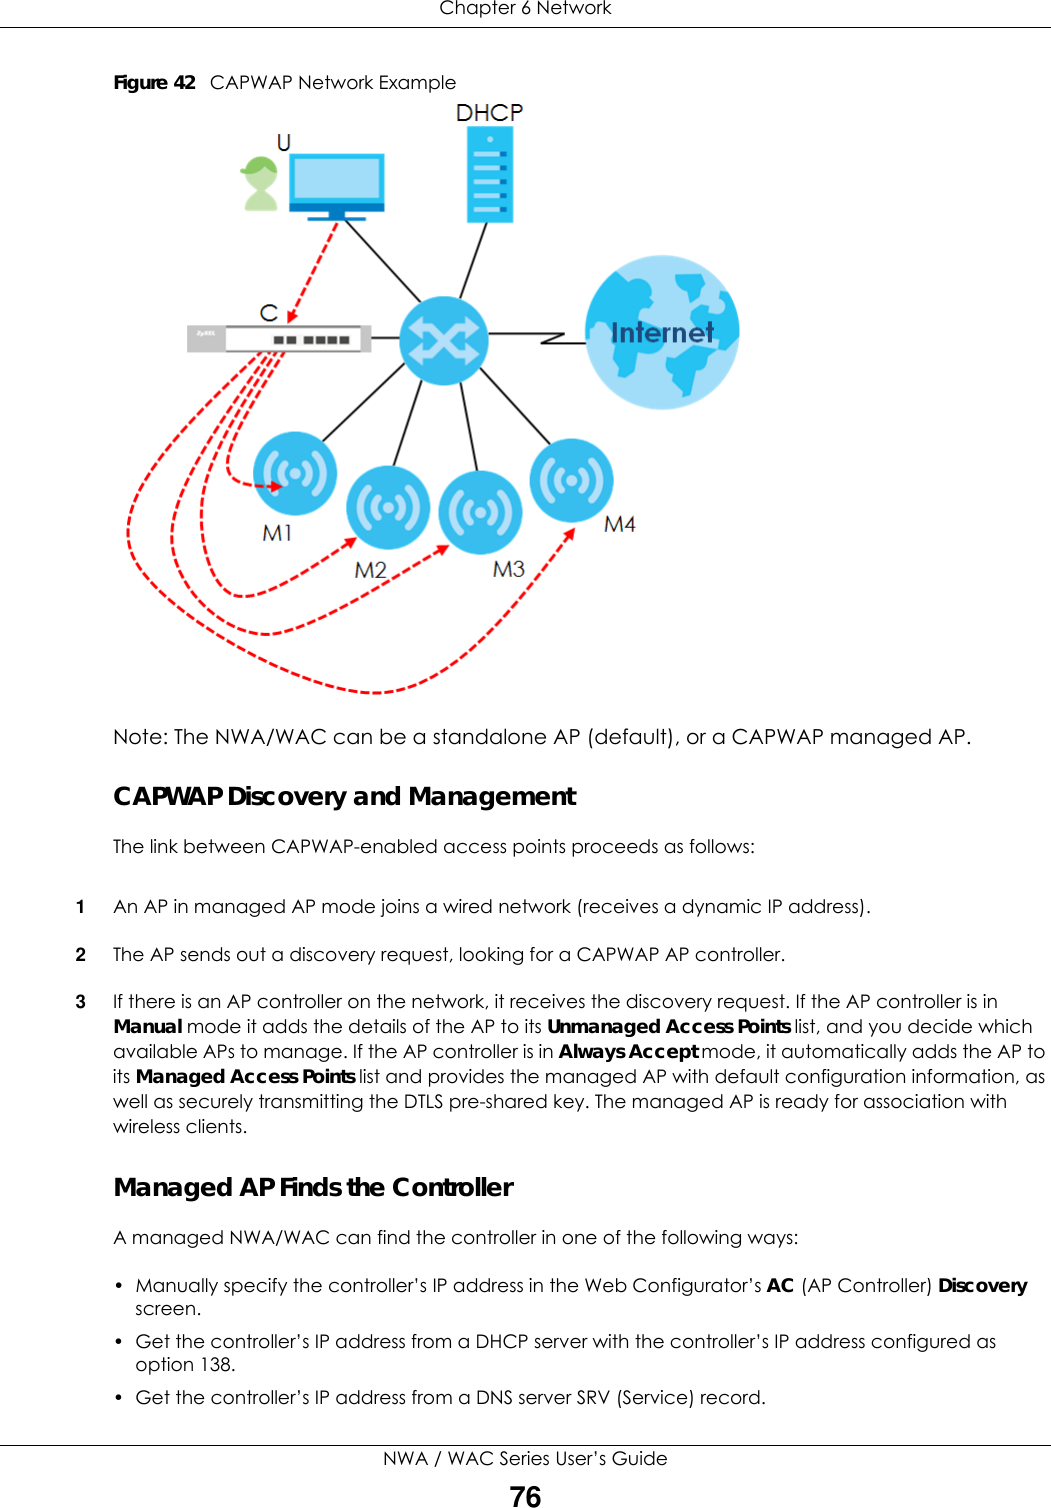 Chapter 6 NetworkNWA / WAC Series User’s Guide76Figure 42   CAPWAP Network ExampleNote: The NWA/WAC can be a standalone AP (default), or a CAPWAP managed AP.CAPWAP Discovery and ManagementThe link between CAPWAP-enabled access points proceeds as follows:1An AP in managed AP mode joins a wired network (receives a dynamic IP address).2The AP sends out a discovery request, looking for a CAPWAP AP controller.3If there is an AP controller on the network, it receives the discovery request. If the AP controller is in Manual mode it adds the details of the AP to its Unmanaged Access Points list, and you decide which available APs to manage. If the AP controller is in Always Accept mode, it automatically adds the AP to its Managed Access Points list and provides the managed AP with default configuration information, as well as securely transmitting the DTLS pre-shared key. The managed AP is ready for association with wireless clients.Managed AP Finds the ControllerA managed NWA/WAC can find the controller in one of the following ways:• Manually specify the controller’s IP address in the Web Configurator’s AC (AP Controller) Discovery screen. • Get the controller’s IP address from a DHCP server with the controller’s IP address configured as option 138.• Get the controller’s IP address from a DNS server SRV (Service) record.